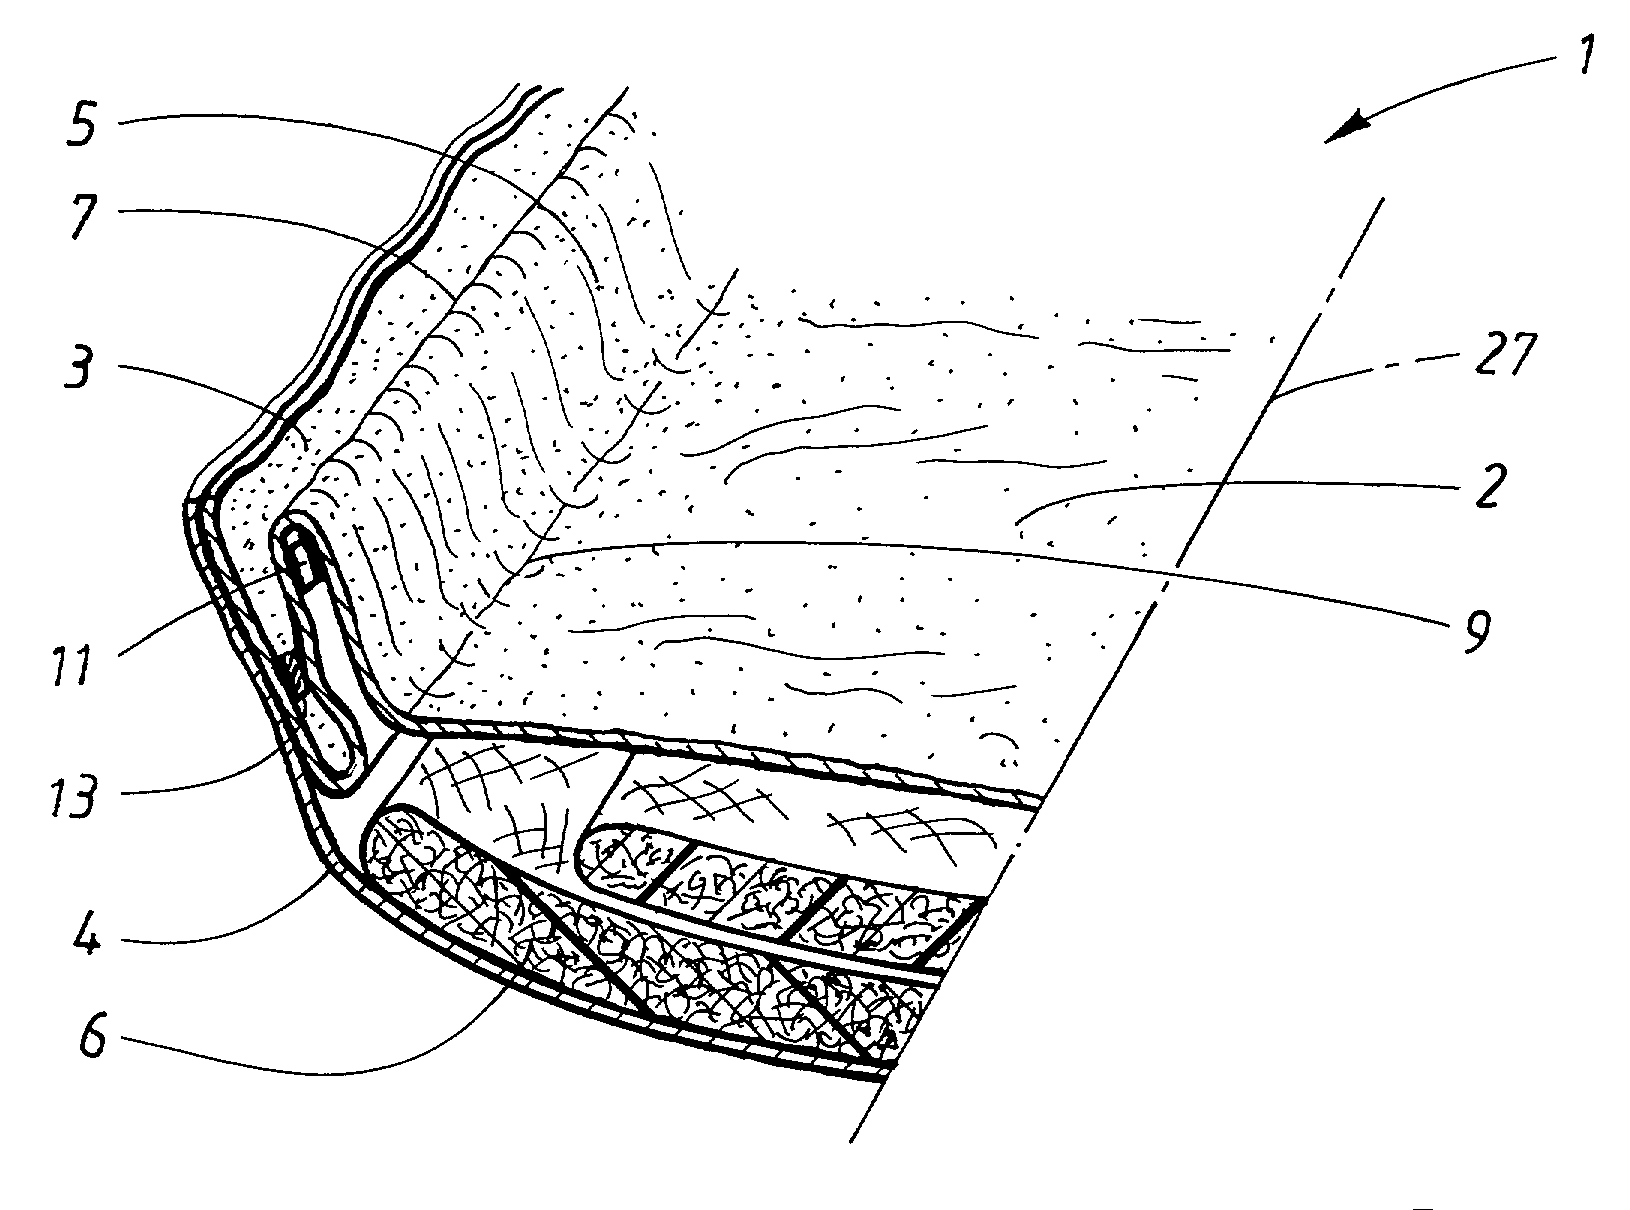 Absorbent product with double barriers and single elastic system